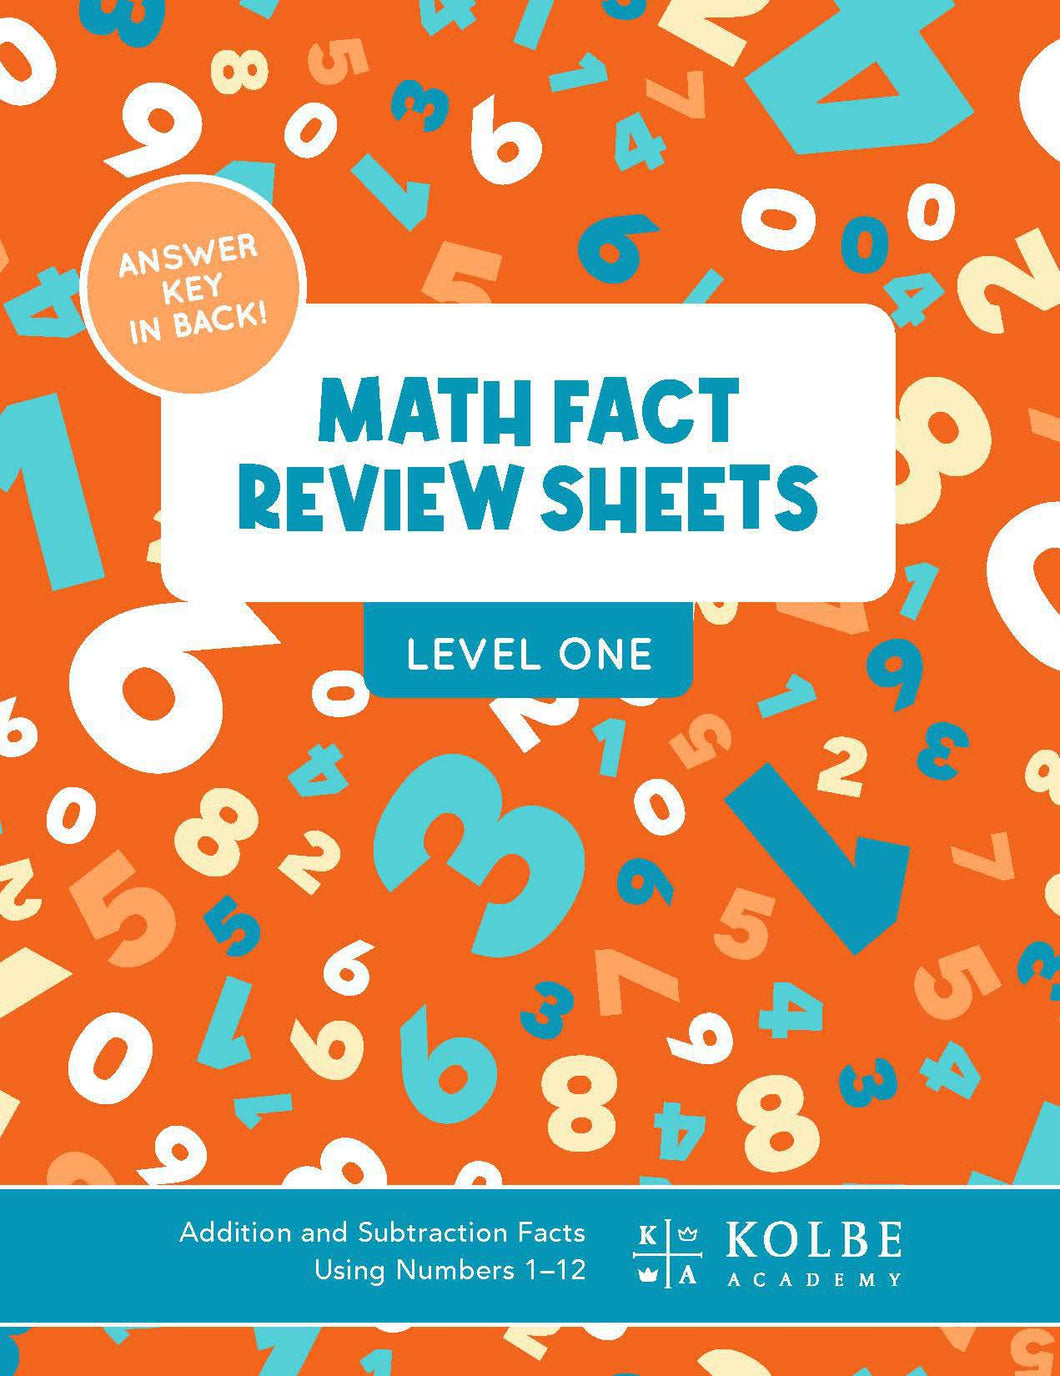 Math Facts Review Sheets- Level 1